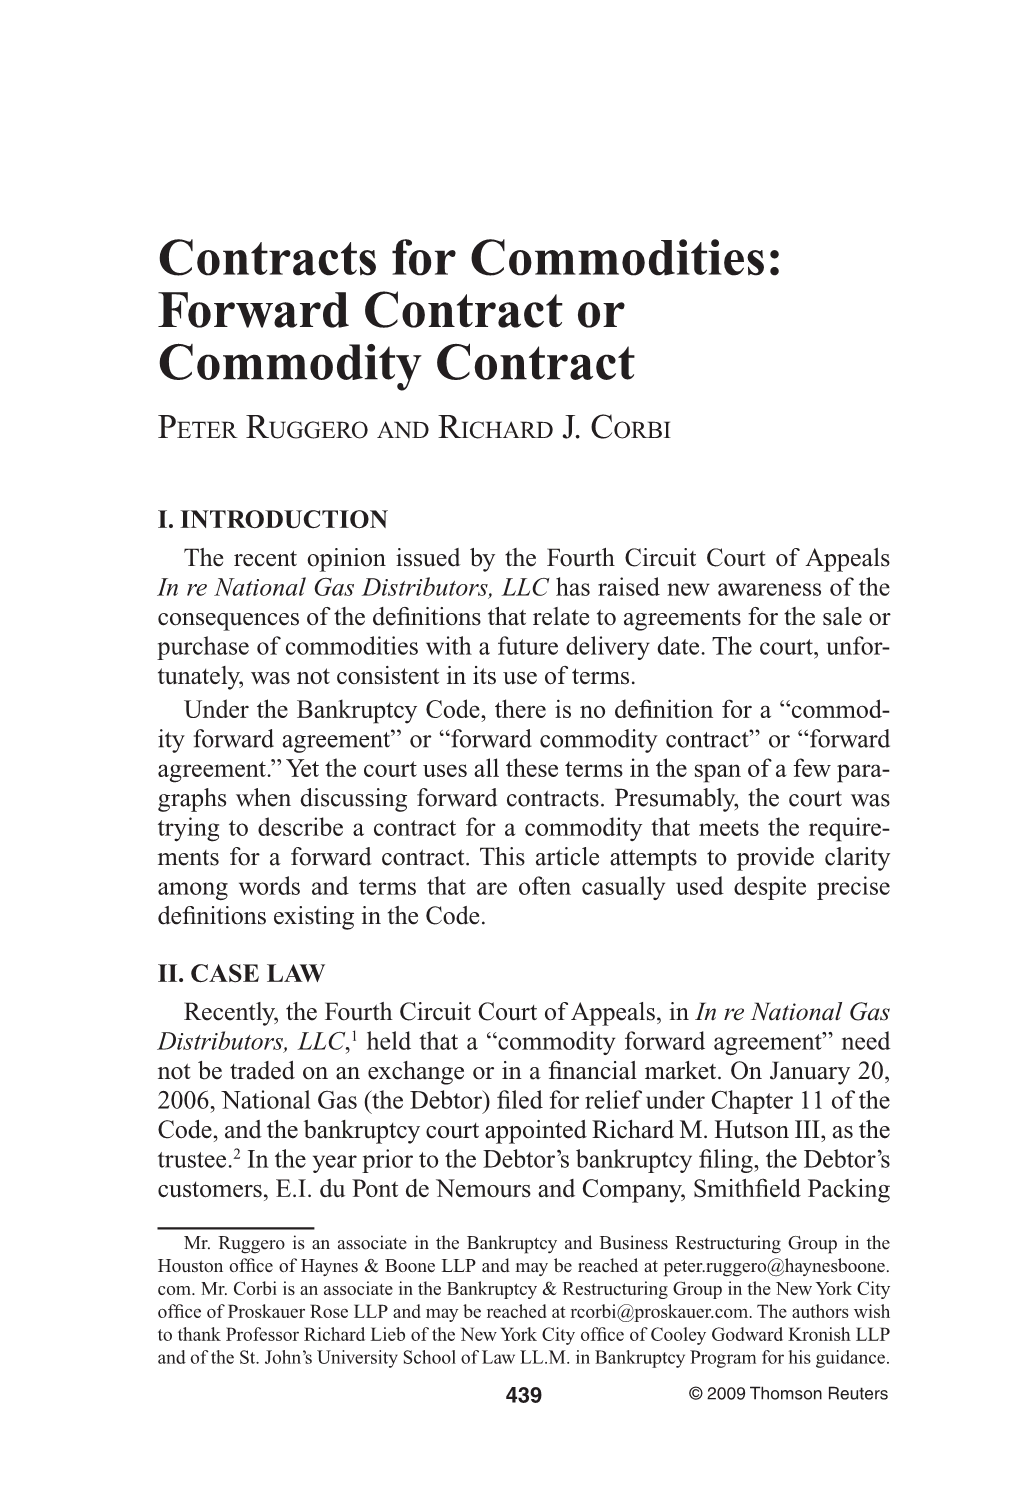 Forward Contract Or Commodity Contract